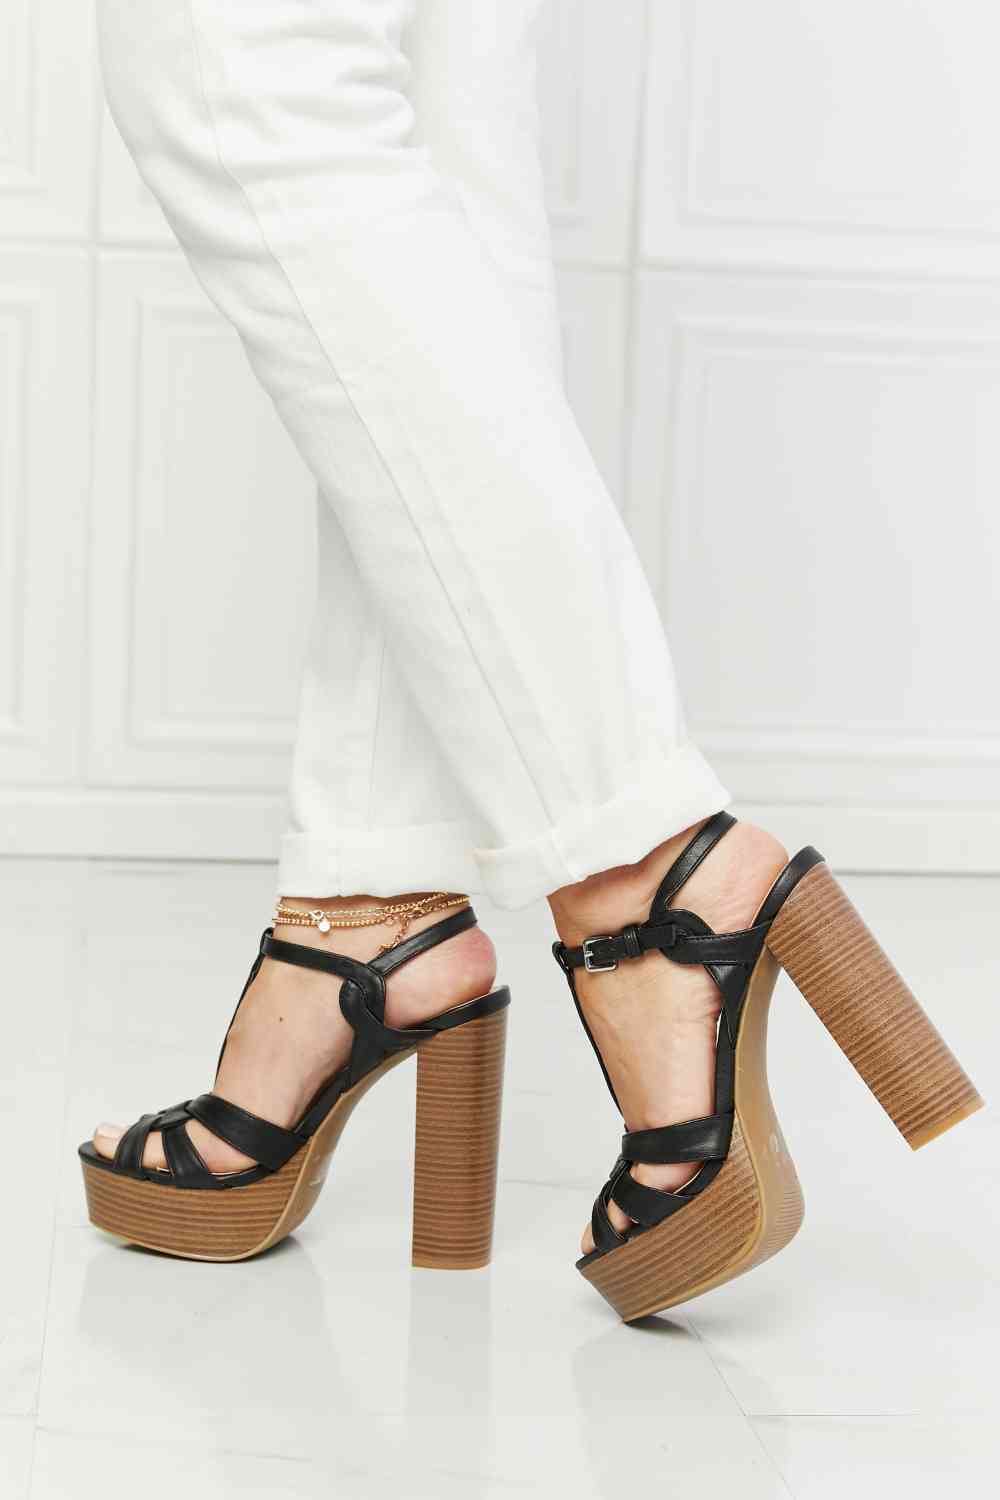 Legend She’s Classy Strappy Heels - Accessories - Shoes - 5 - 2024